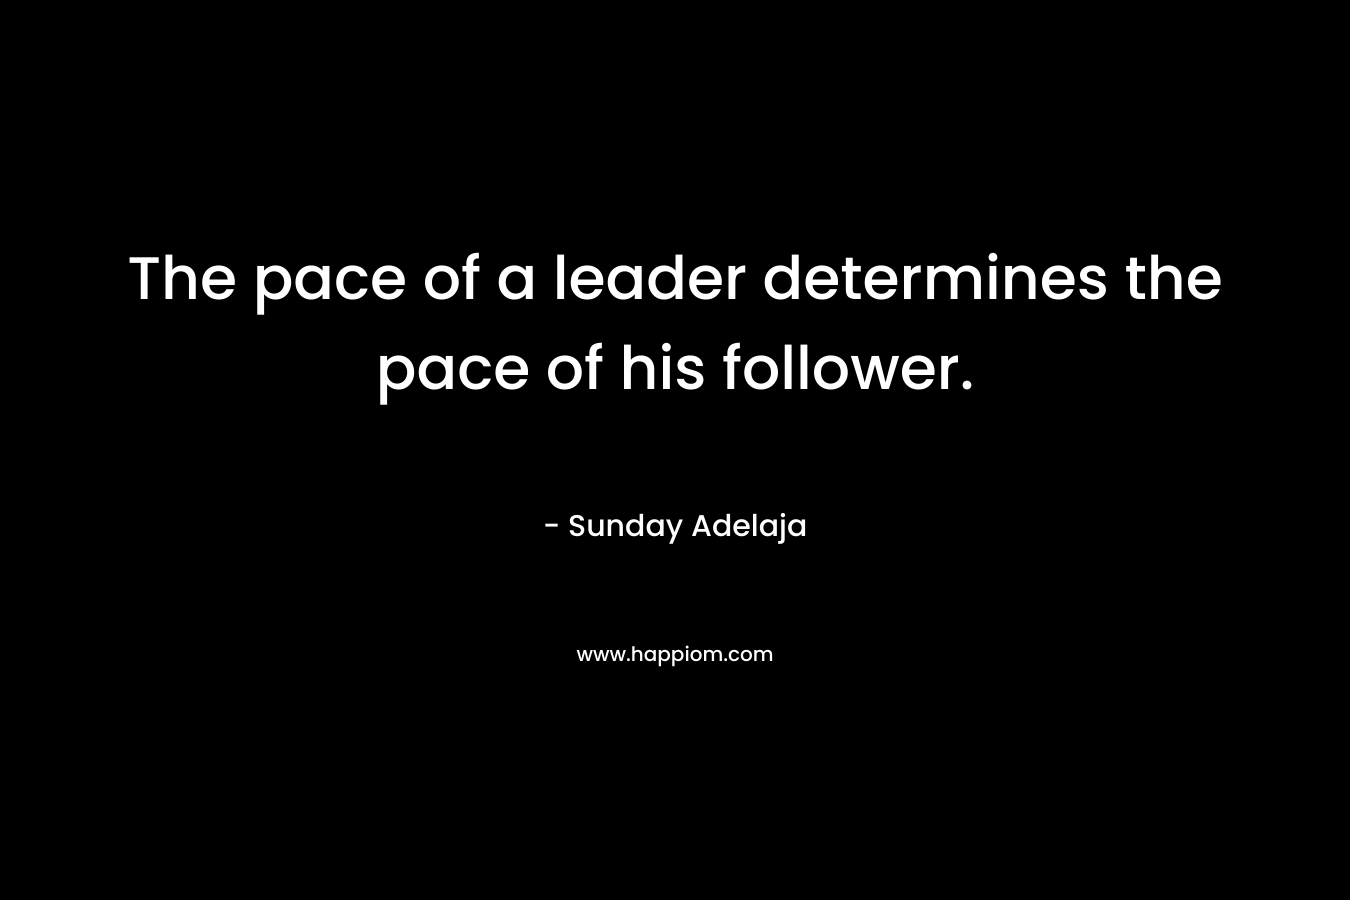 The pace of a leader determines the pace of his follower.